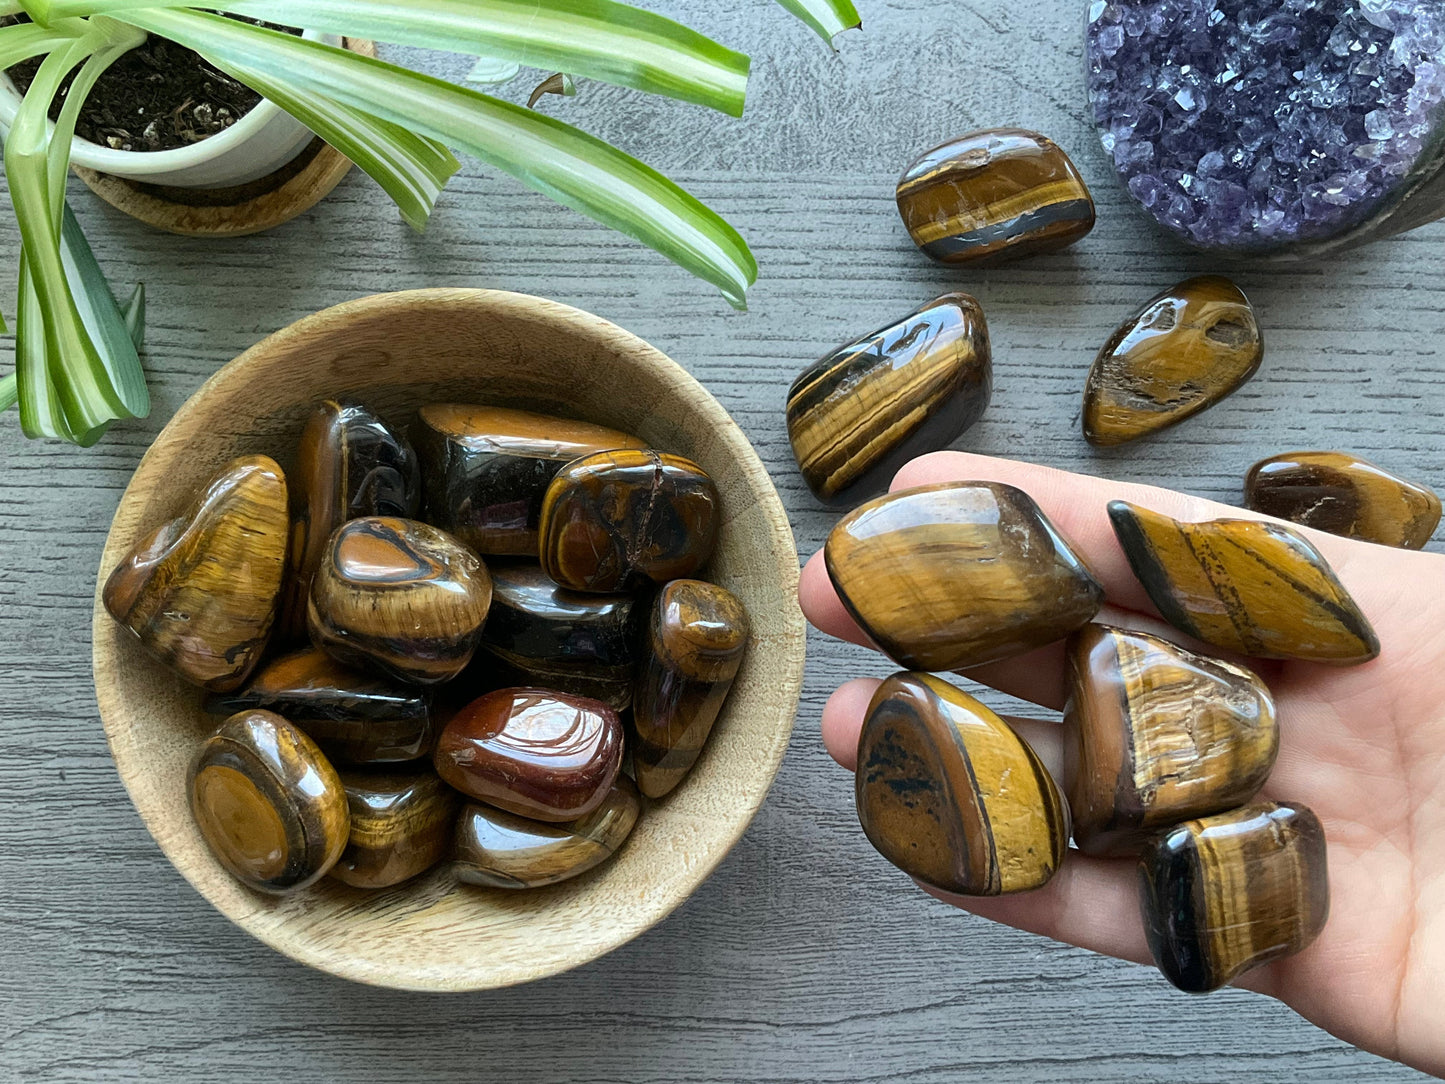 Pictured are various tiger's eye tumbled stones.